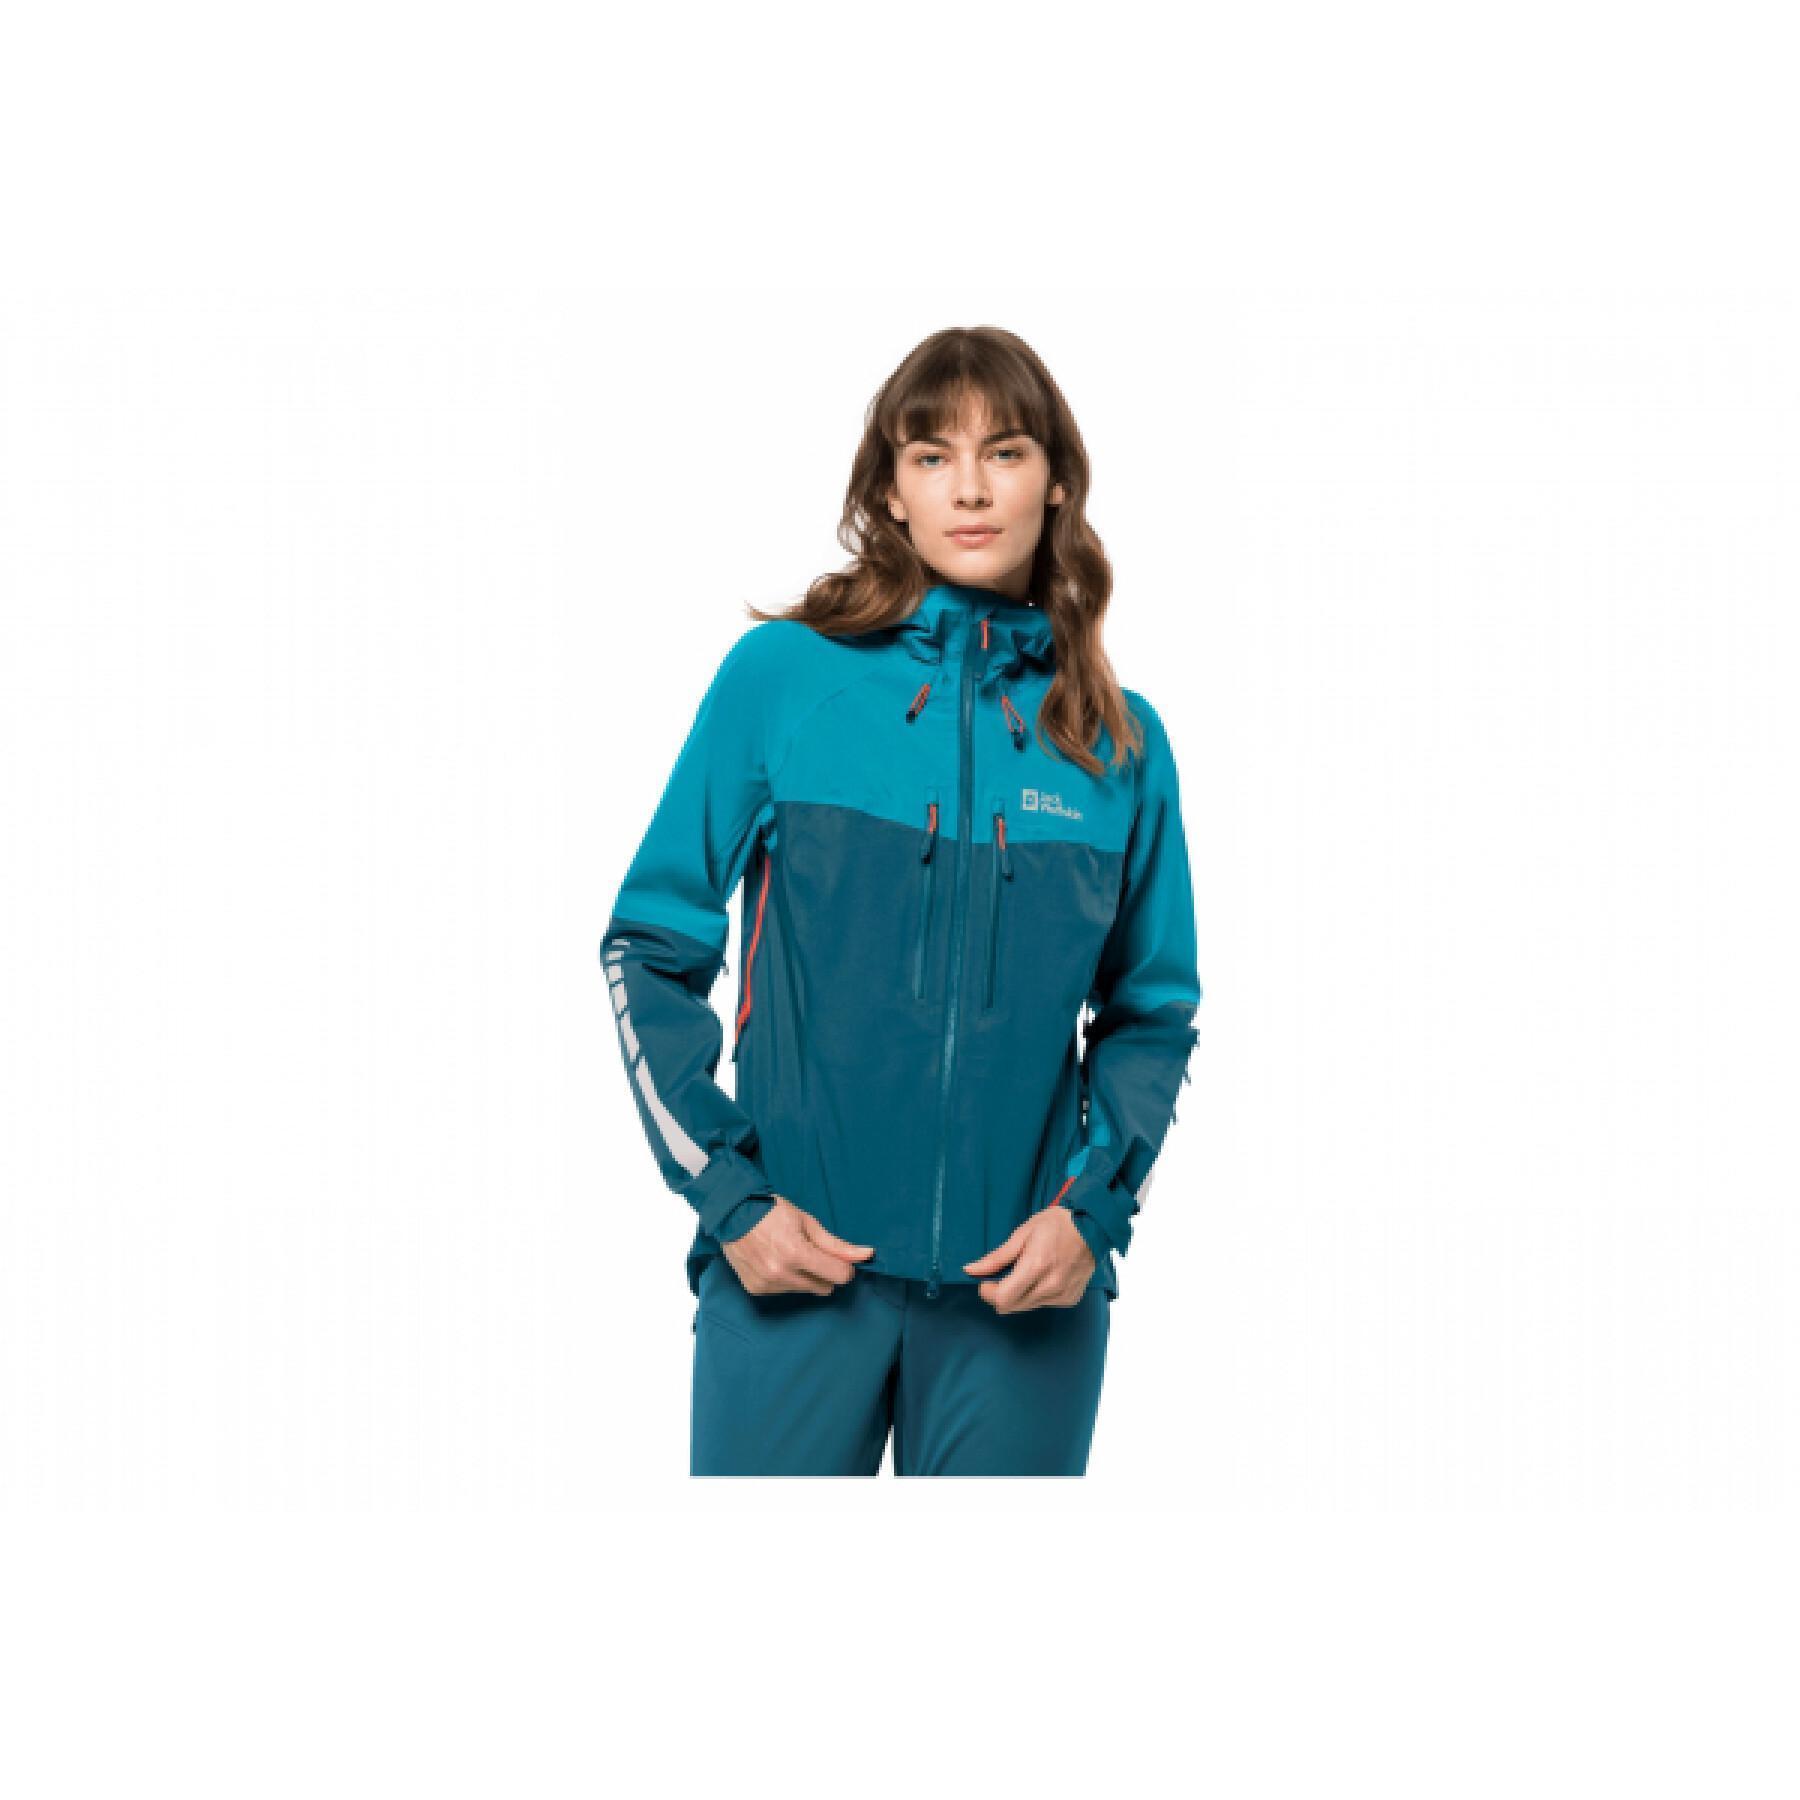 Chaqueta impermeable para mujer Jack Wolfskin Morobbia 3L